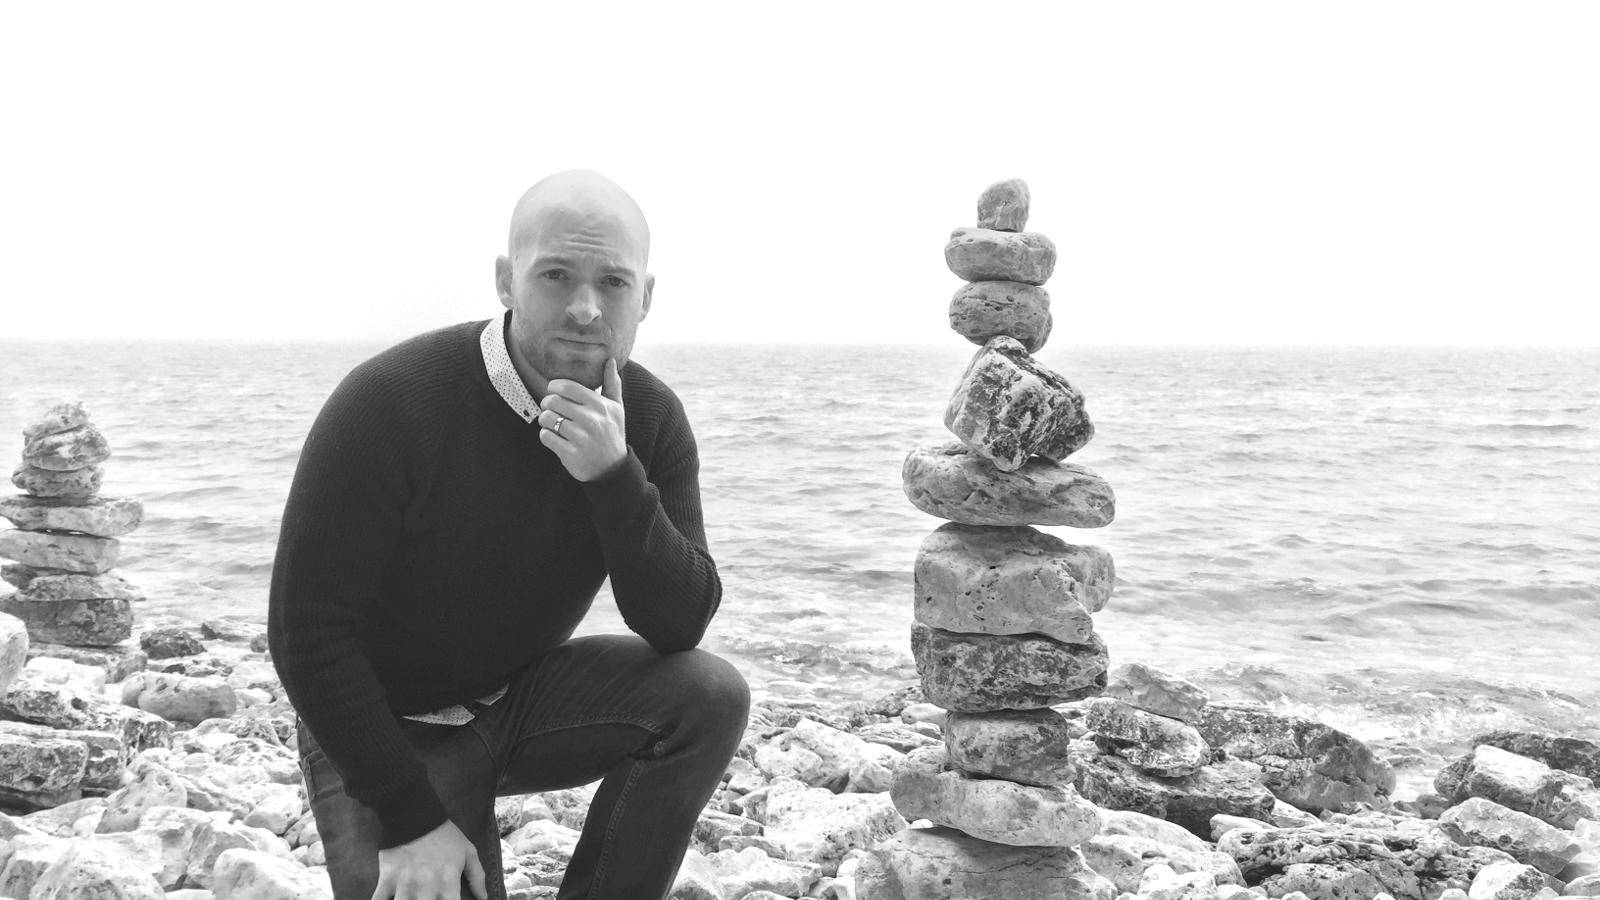 Daniel Morell looking pensive on a beach with a cairn.